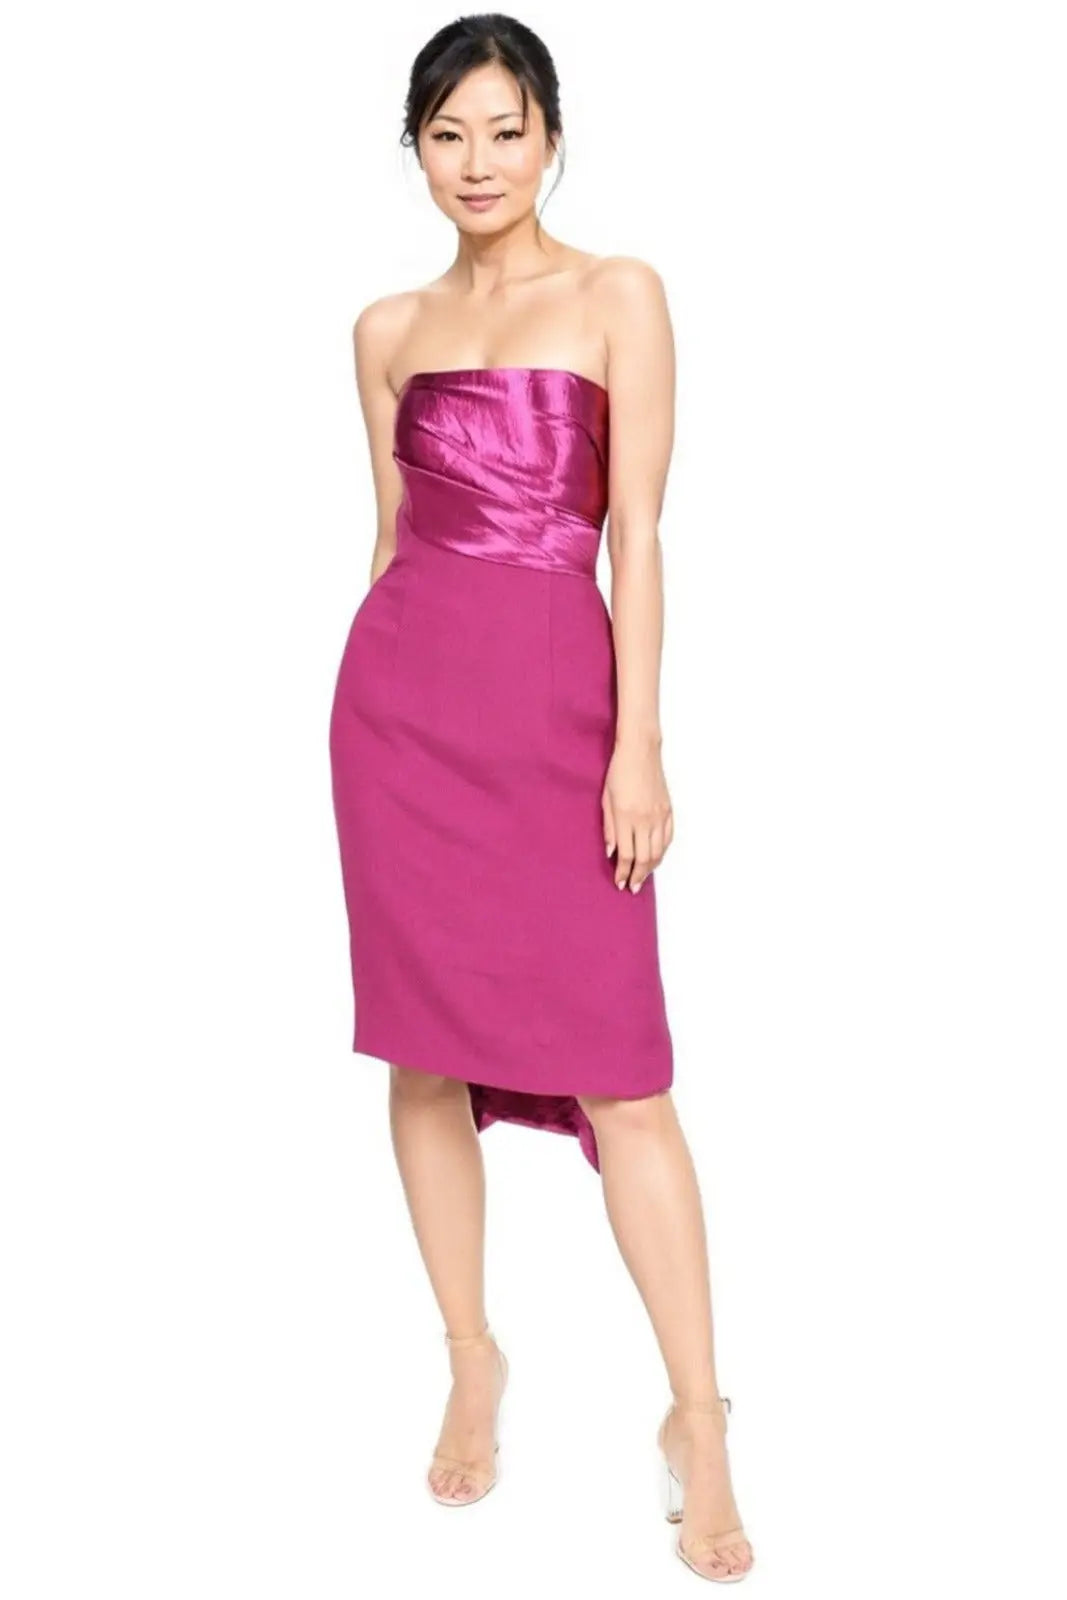 Strapless Cocktail Pink 